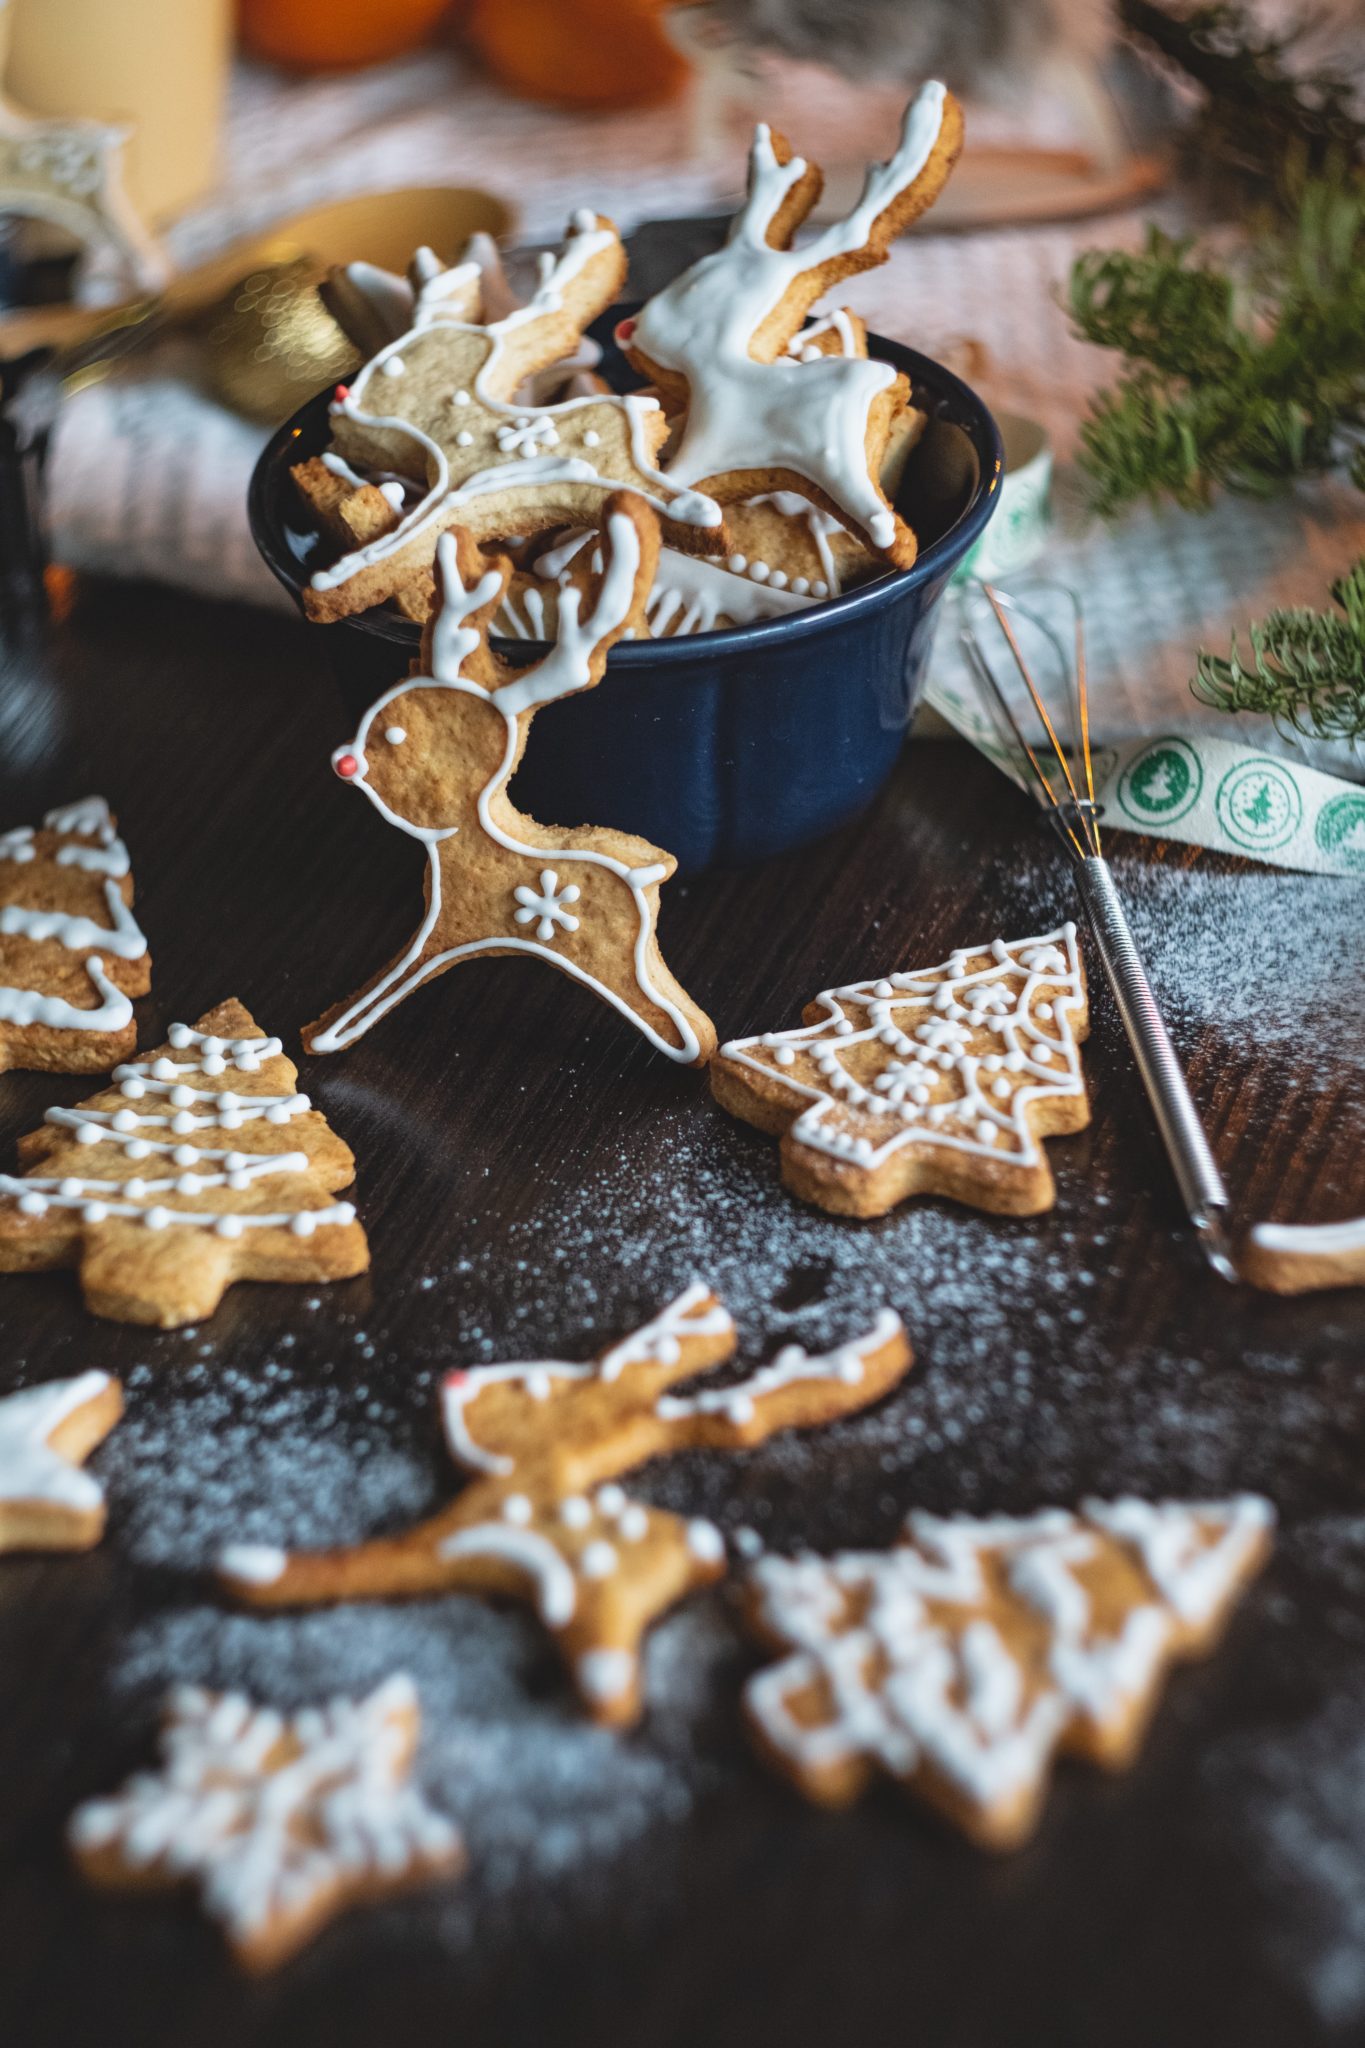 Top 4 Christmas Food Trends for 2022 Counterline